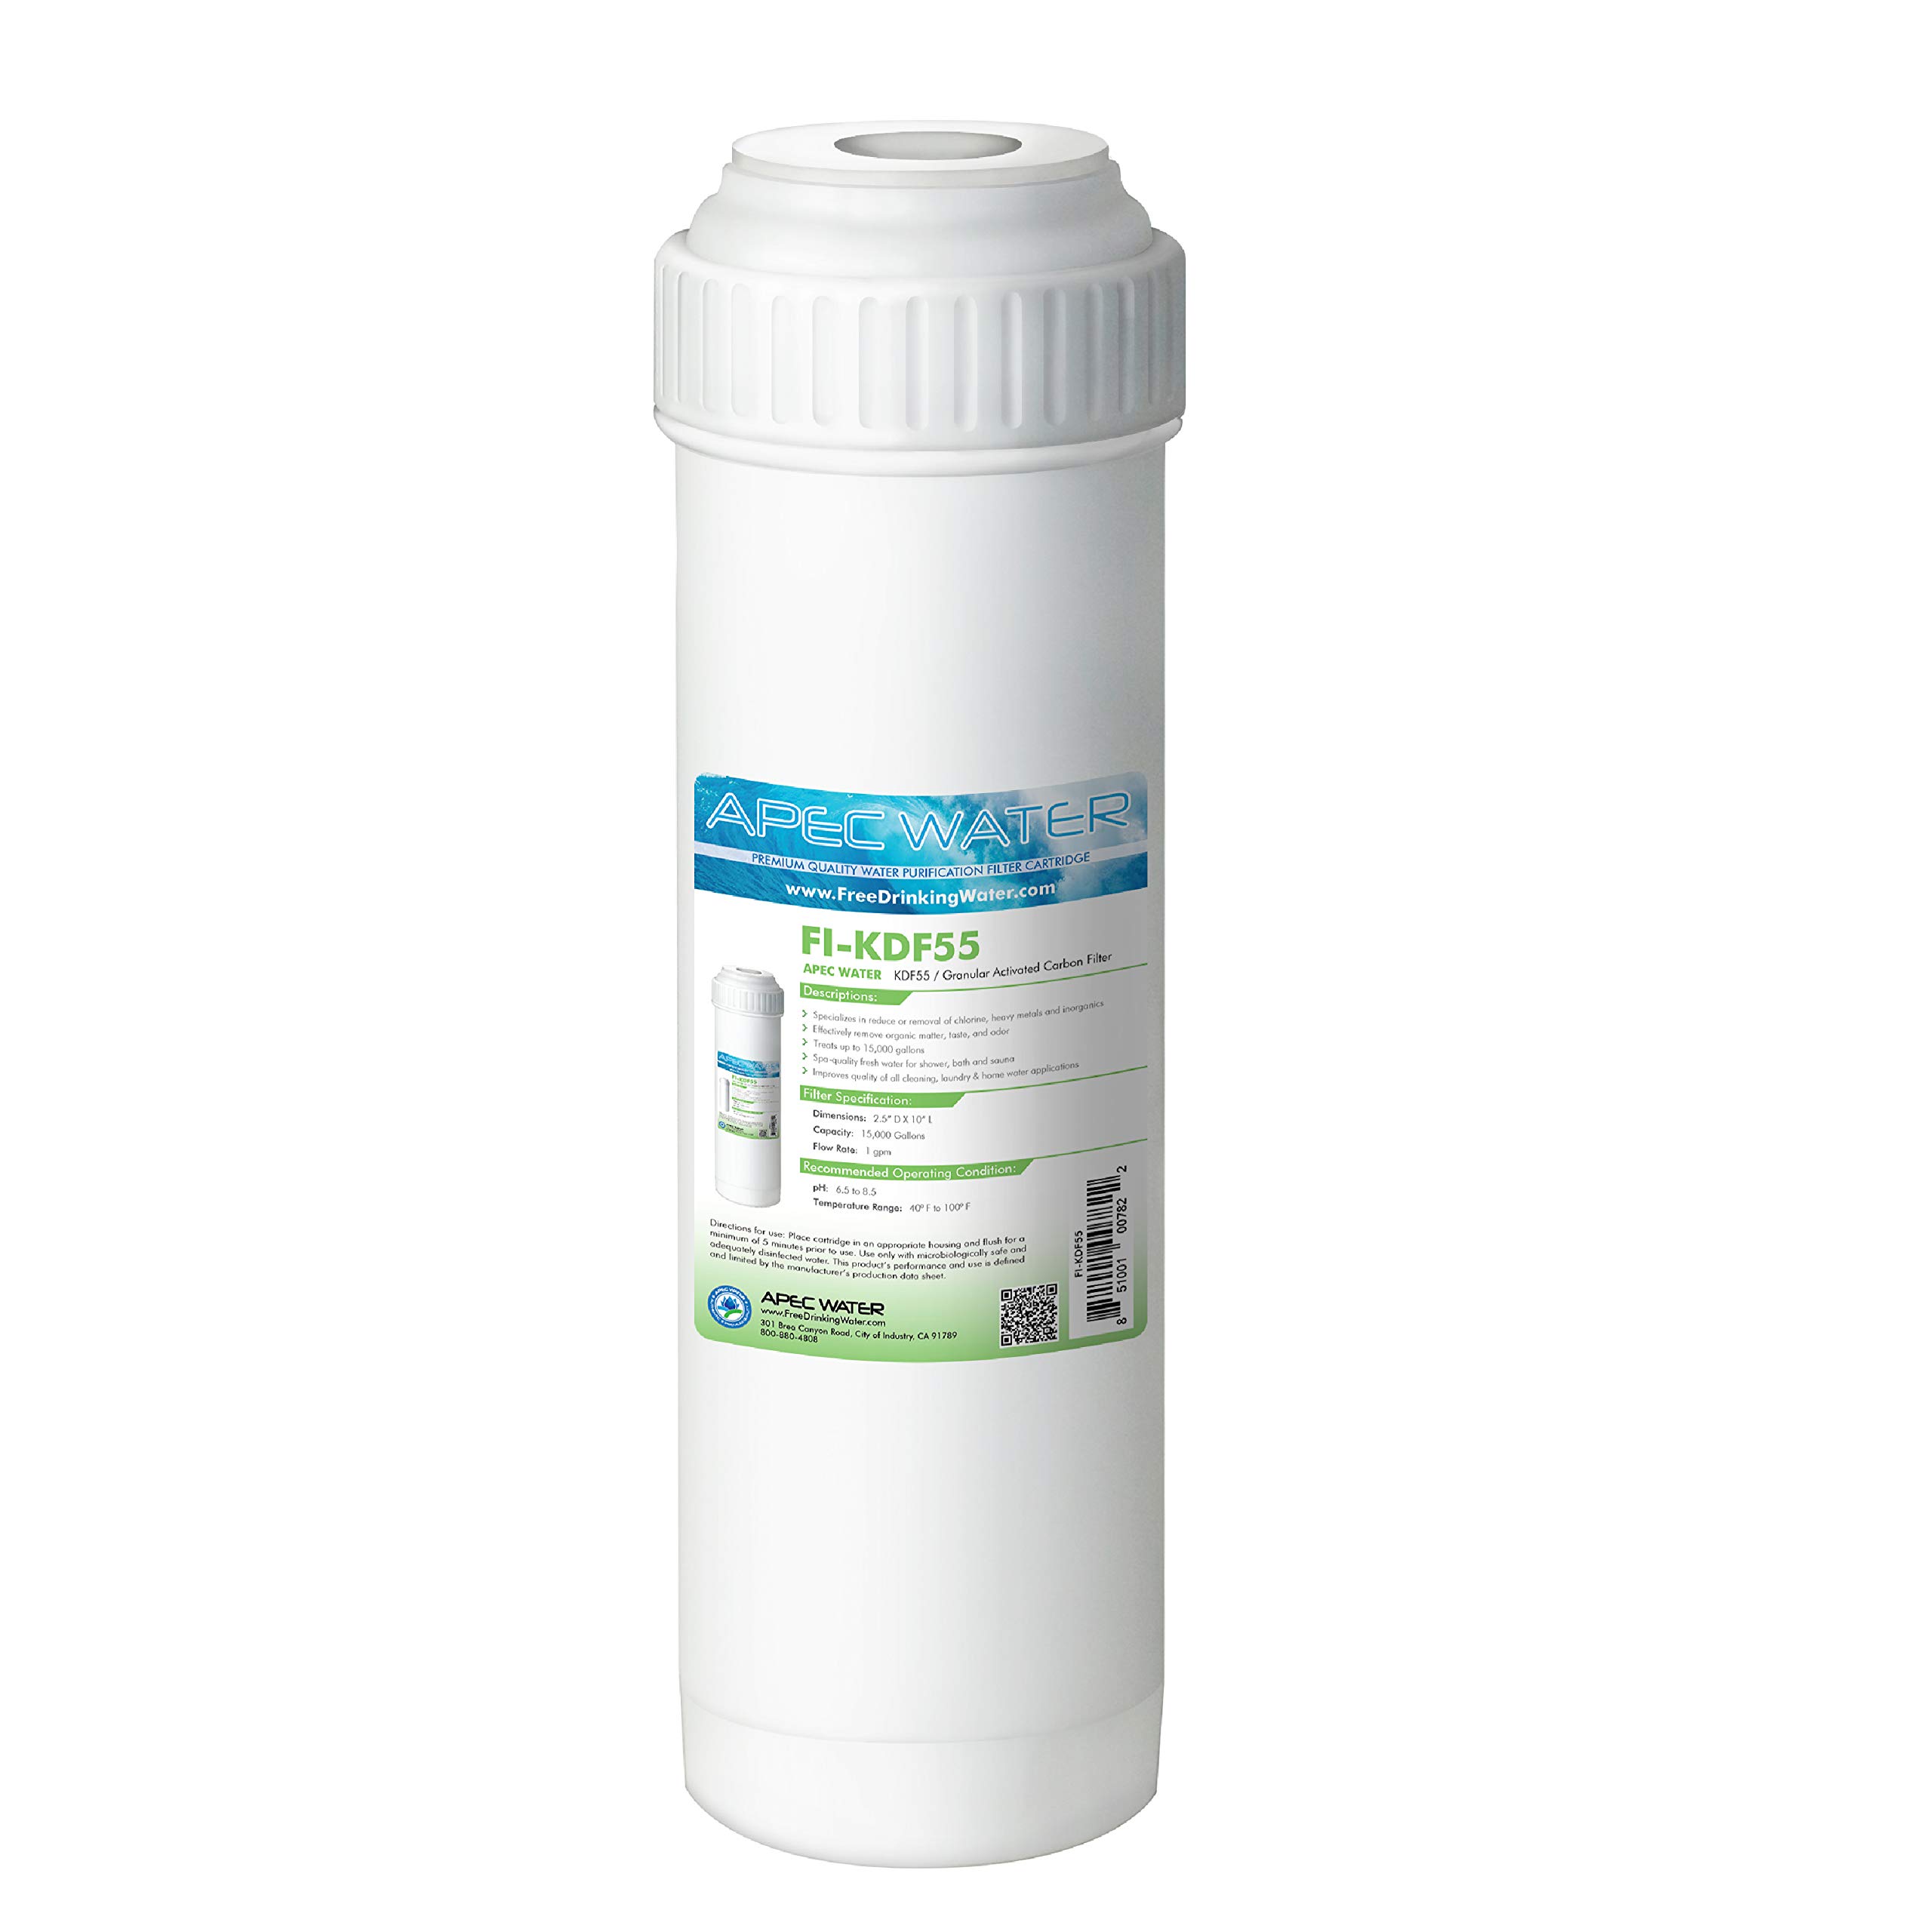 APEC Water Systems FI-KDF55 2.5"x10" Chlorine and Heavy Metal Reduction Specialty Water Filter